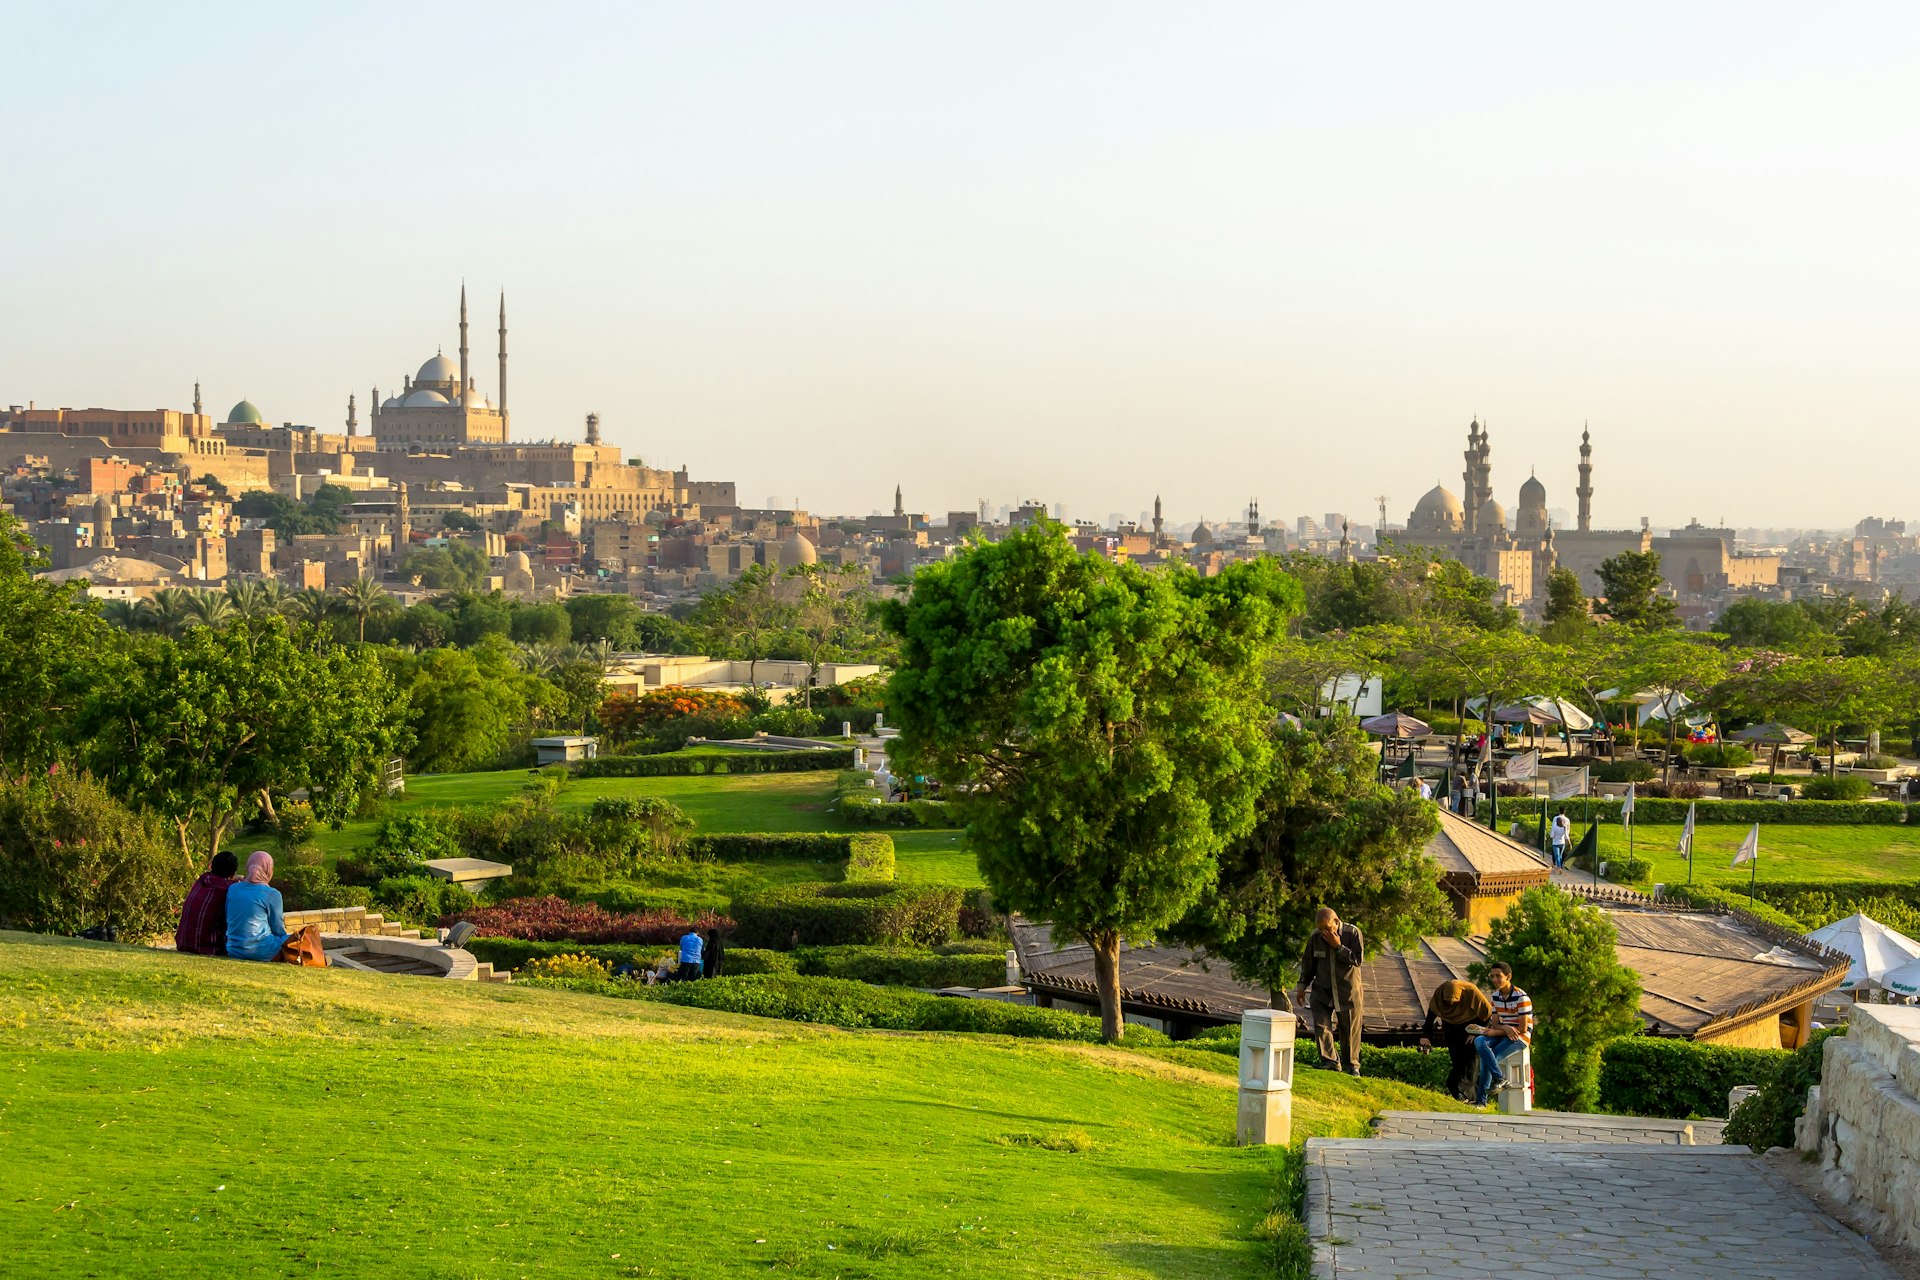 View of the Al-Azhar Park gardens. In the background is the Great Mosque of Muhammad Ali Pasha, a mosque situated in the Citadel of Cairo.